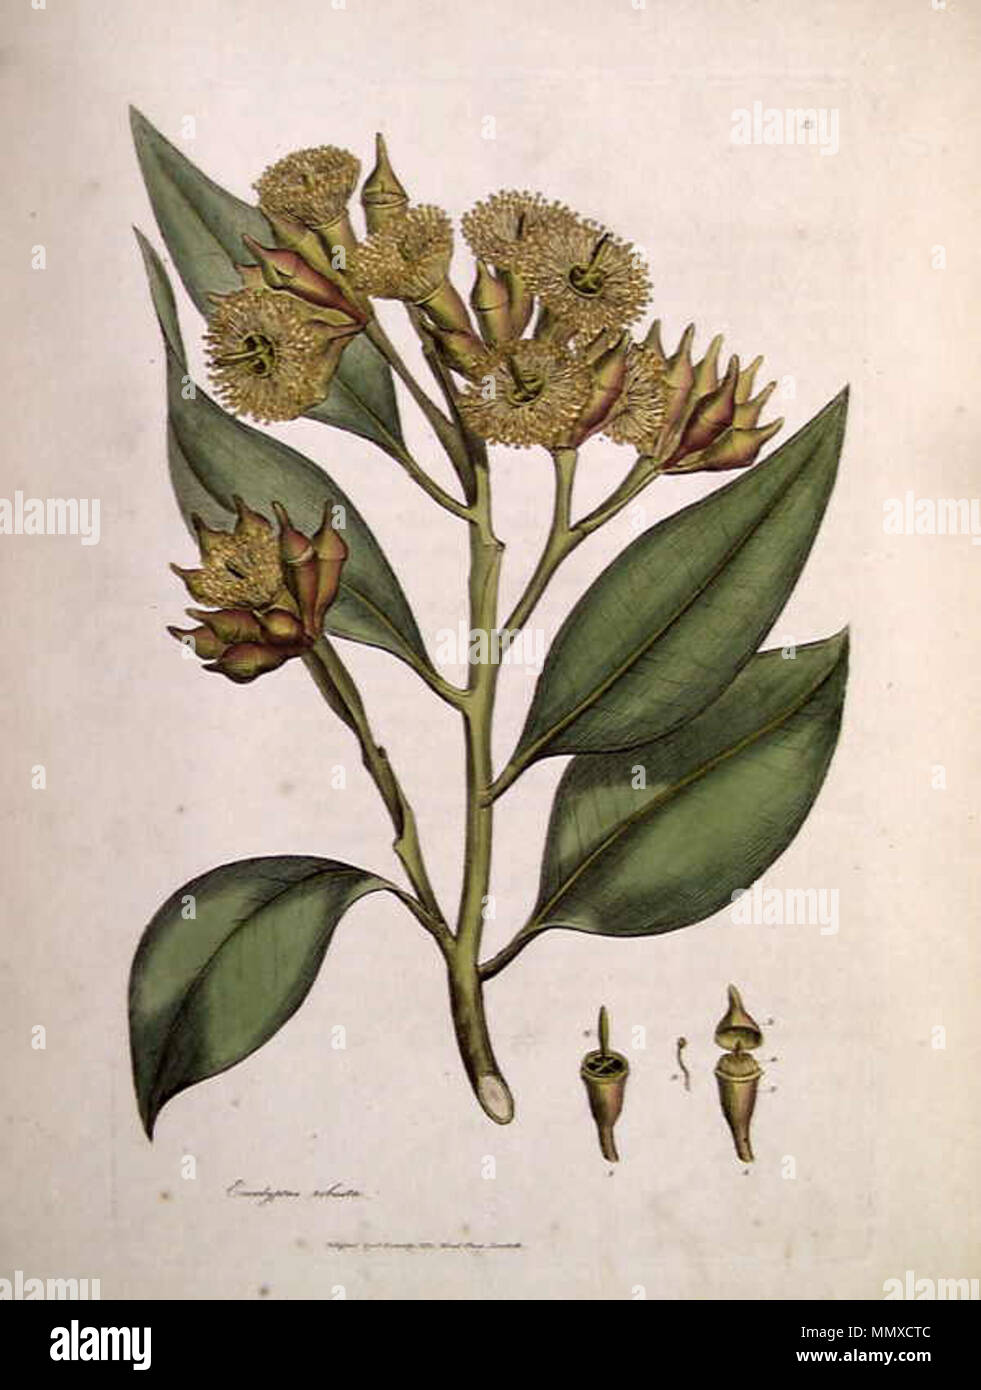 . This is an image of a print of a hand coloured engraving by James Sowerby (1757-1822), based on drawing nominally by John White but probably by the convict artist Thomas Watling. It appeared as Tab. XIII in James Edward Smith's 1793 A Specimen of the Botany of New Holland. The plant depicted is Eucalyptus robusta. The accompanying text explains the figure thus: 1. 1. A young flower. 2. Calyx. 3. Lid. 4. Stamina not full grown. 5. A complete stamen. 6. Style.  . 1793. James Sowerby Eucalyptus robusta (Sowerby) Stock Photo